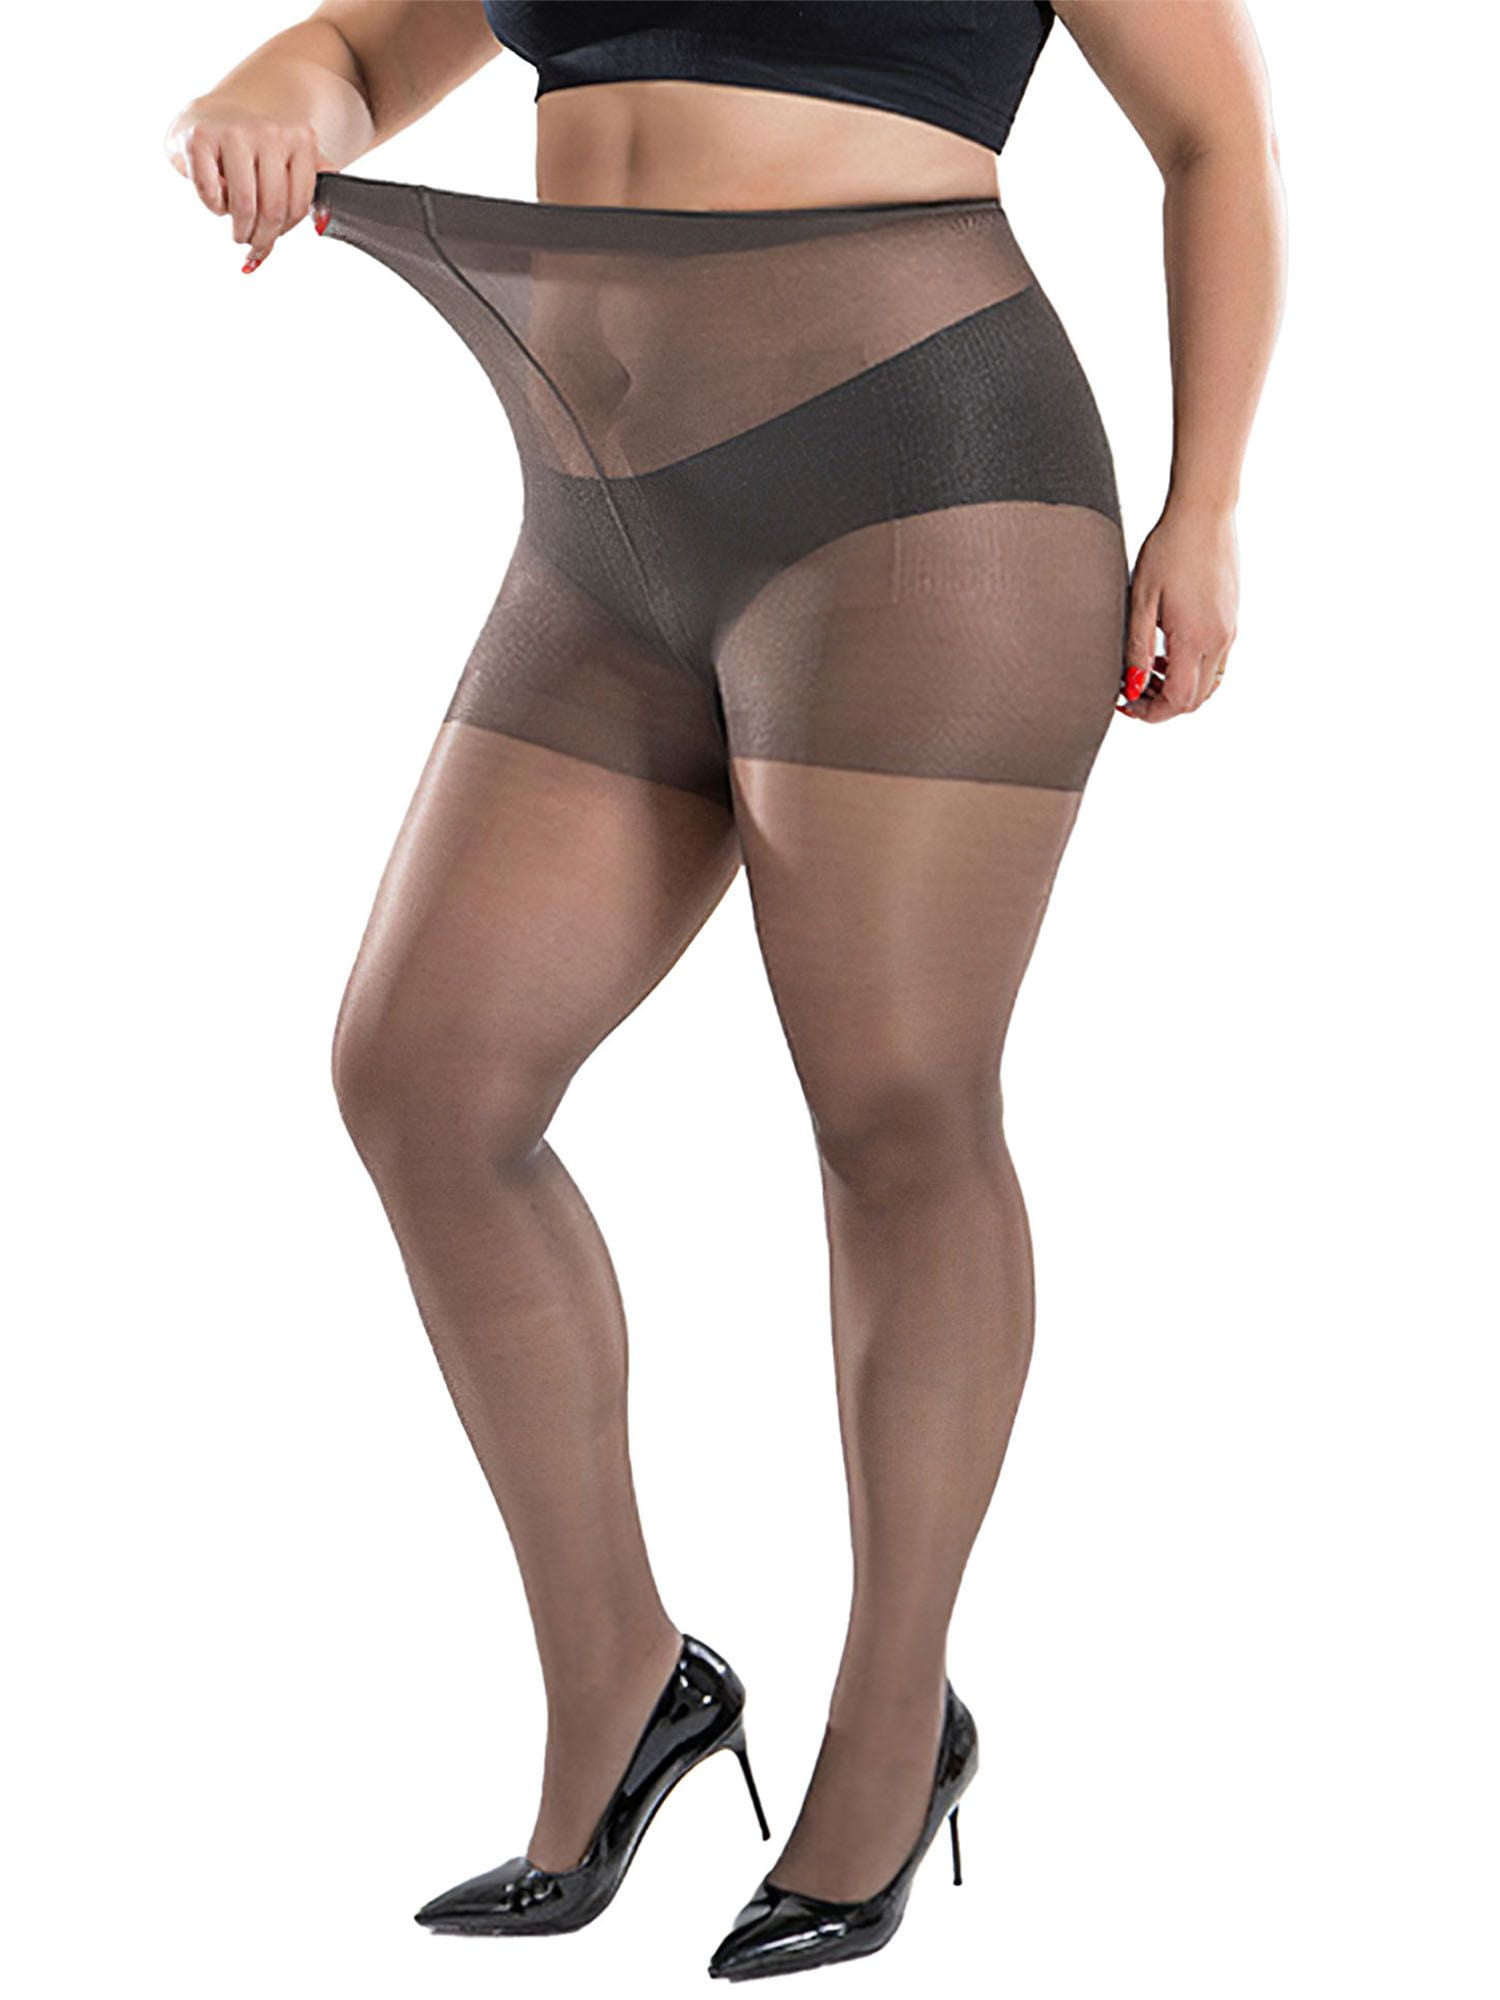 Queen Ultra Sheer Tights Without Control